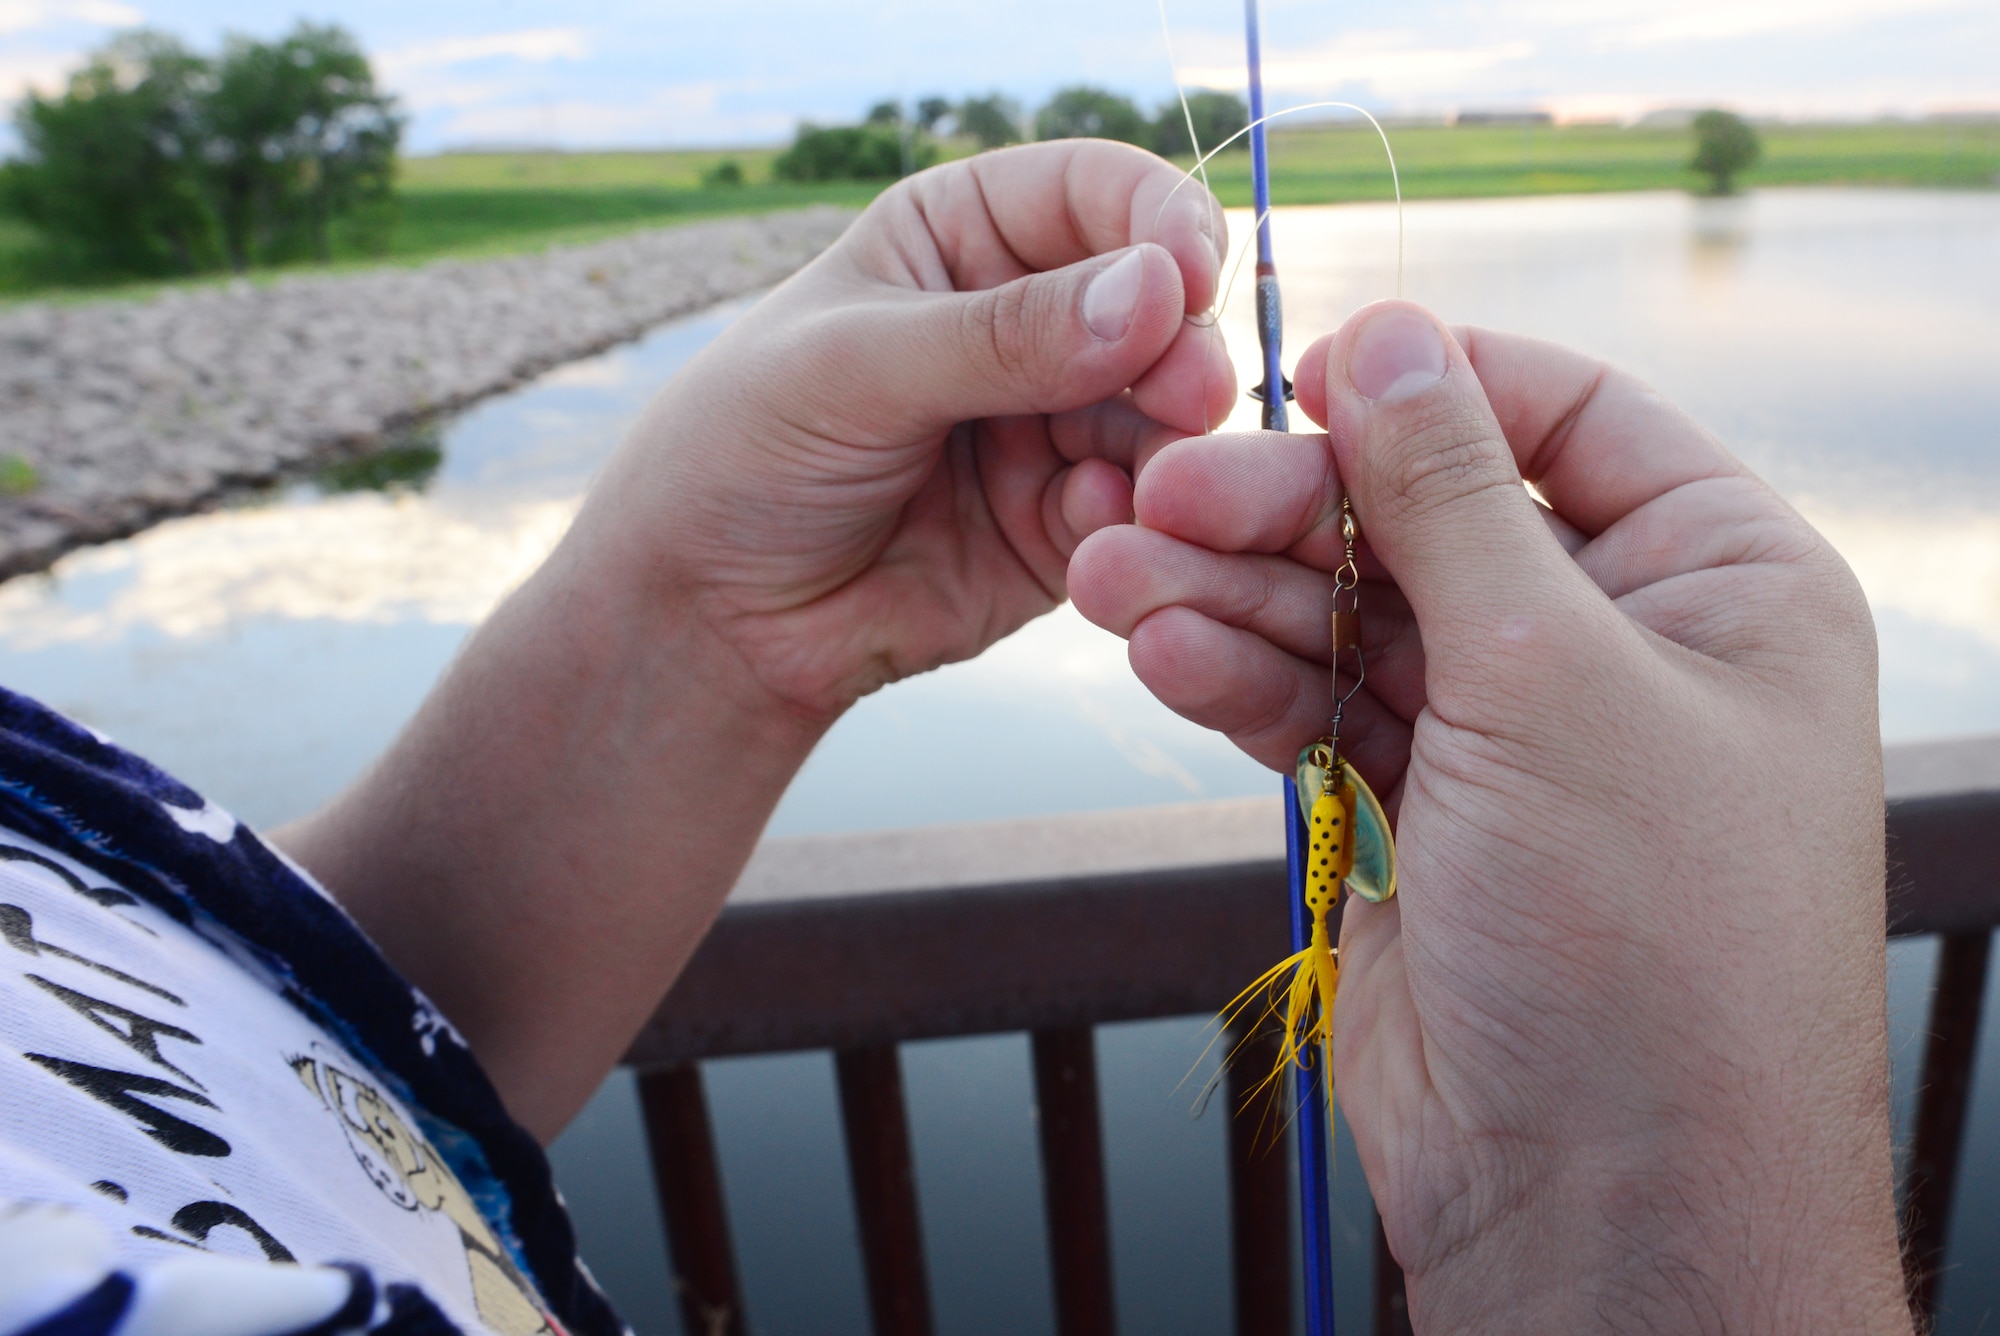 Airman John Ennis, a 28th Bomb Wing Public Affairs broadcast journalist, rigs his fishing rod at Ellsworth Air Force Base, S.D., July 12, 2018. Base fishing permits and South Dakota fishing licenses are available at Outdoor Recreation. (U.S. Air Force photo by Airman 1st Class Nicolas Z. Erwin)